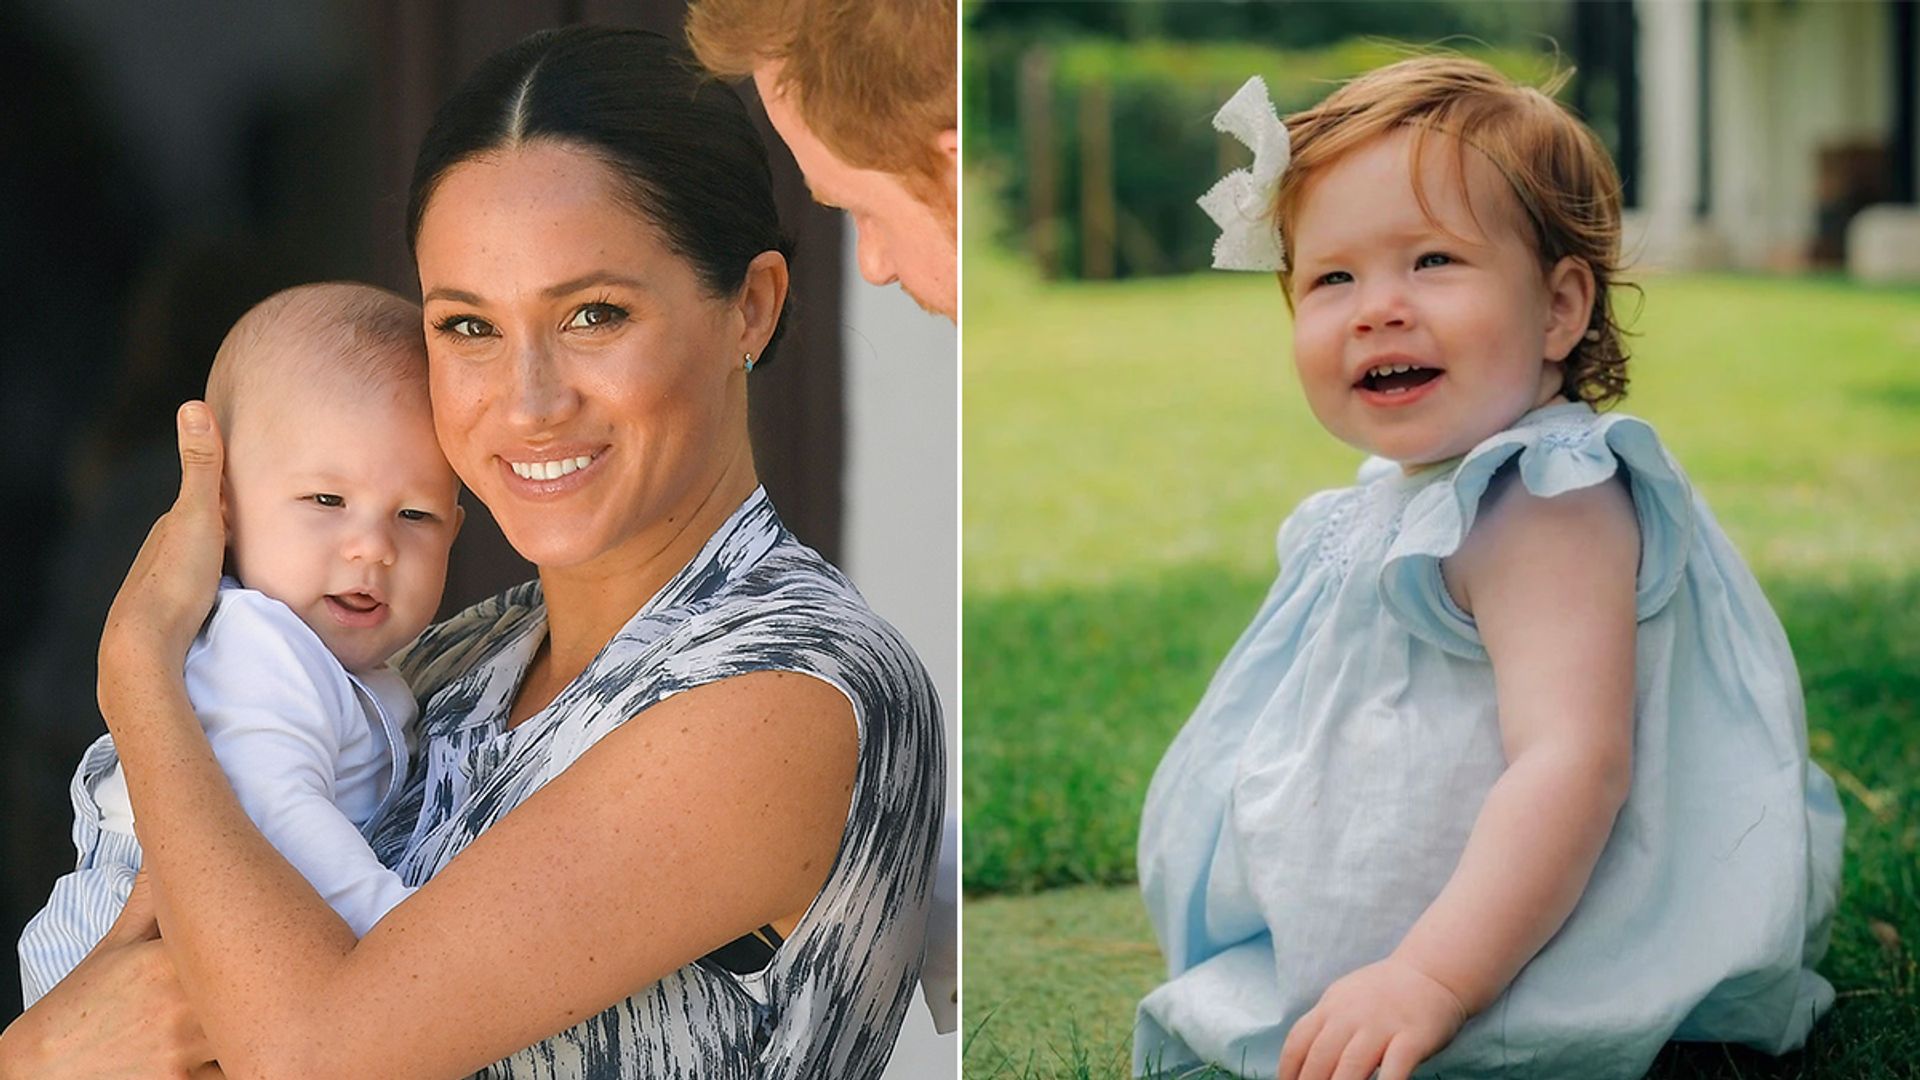 Split image of Meghan Markle holding Prince Archie and Princess Lilibet playing in the grass